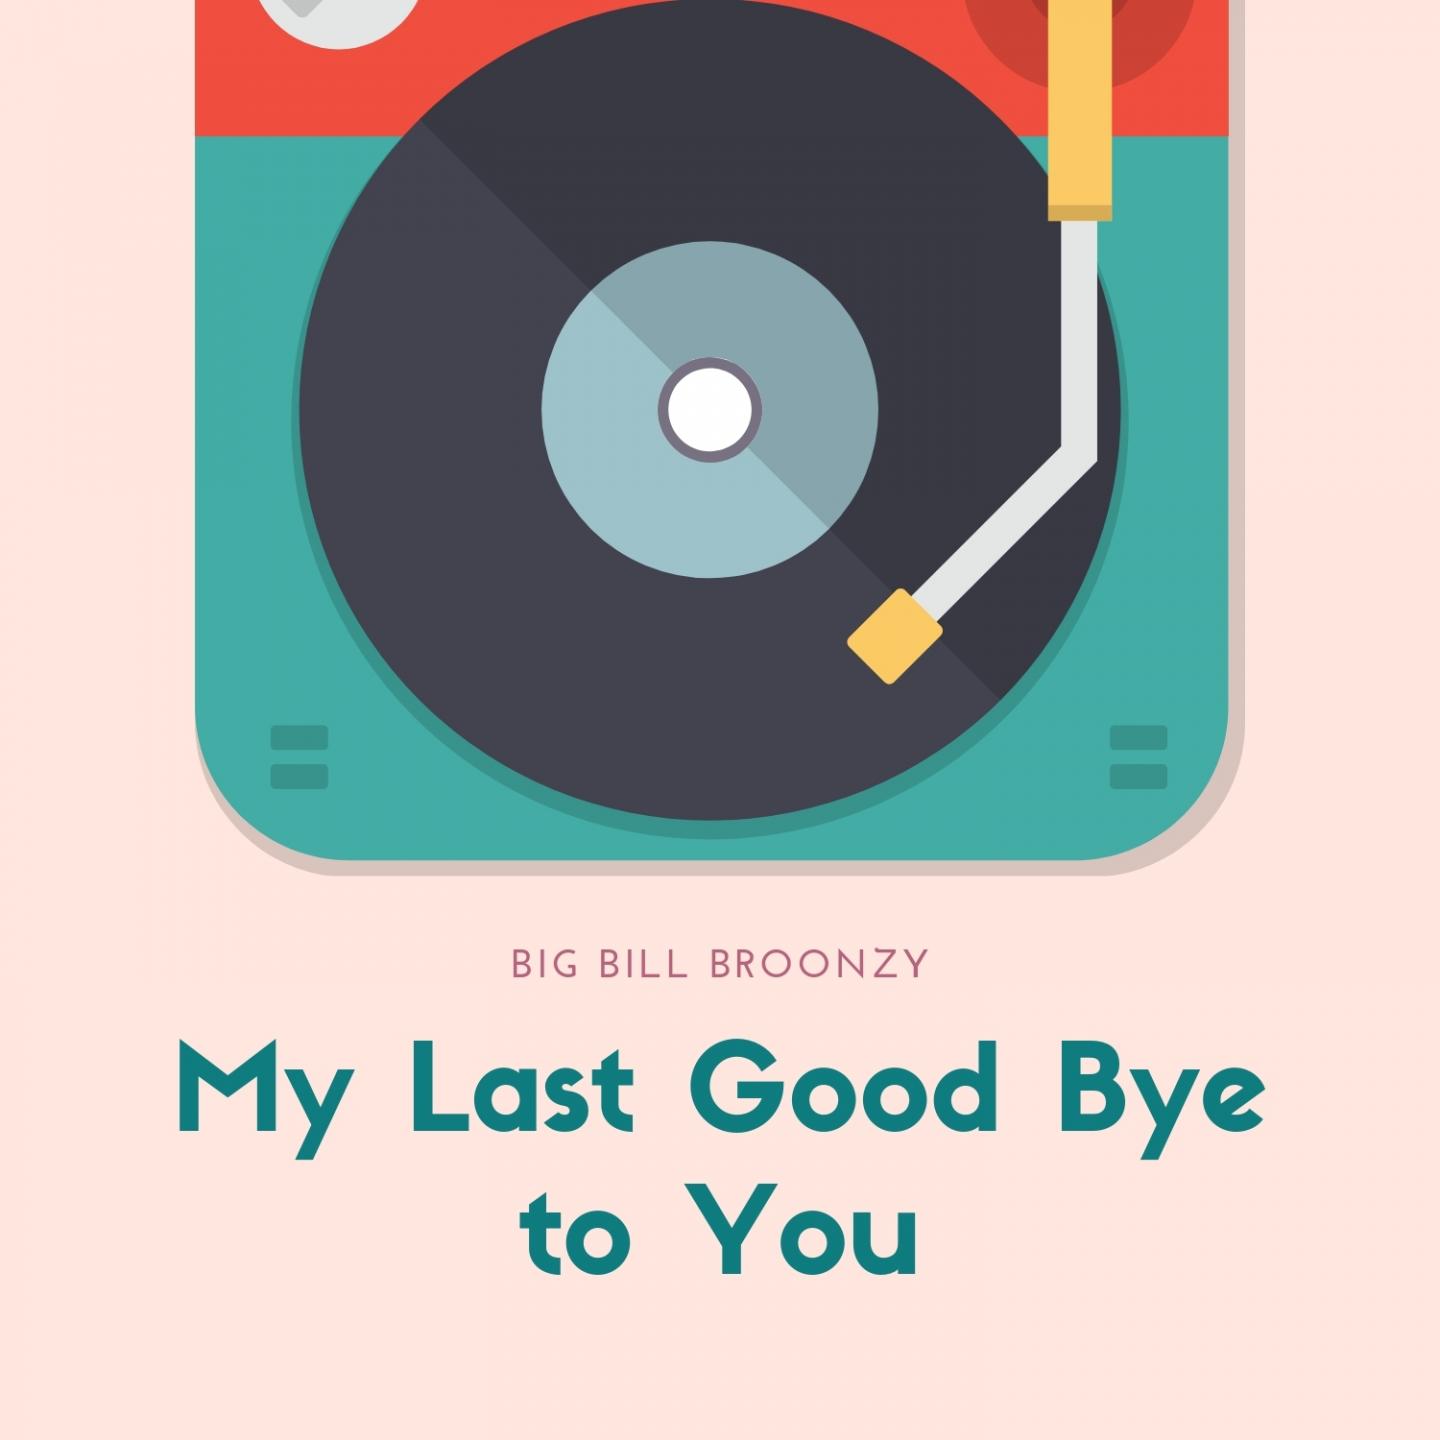 My Last Good Bye to You